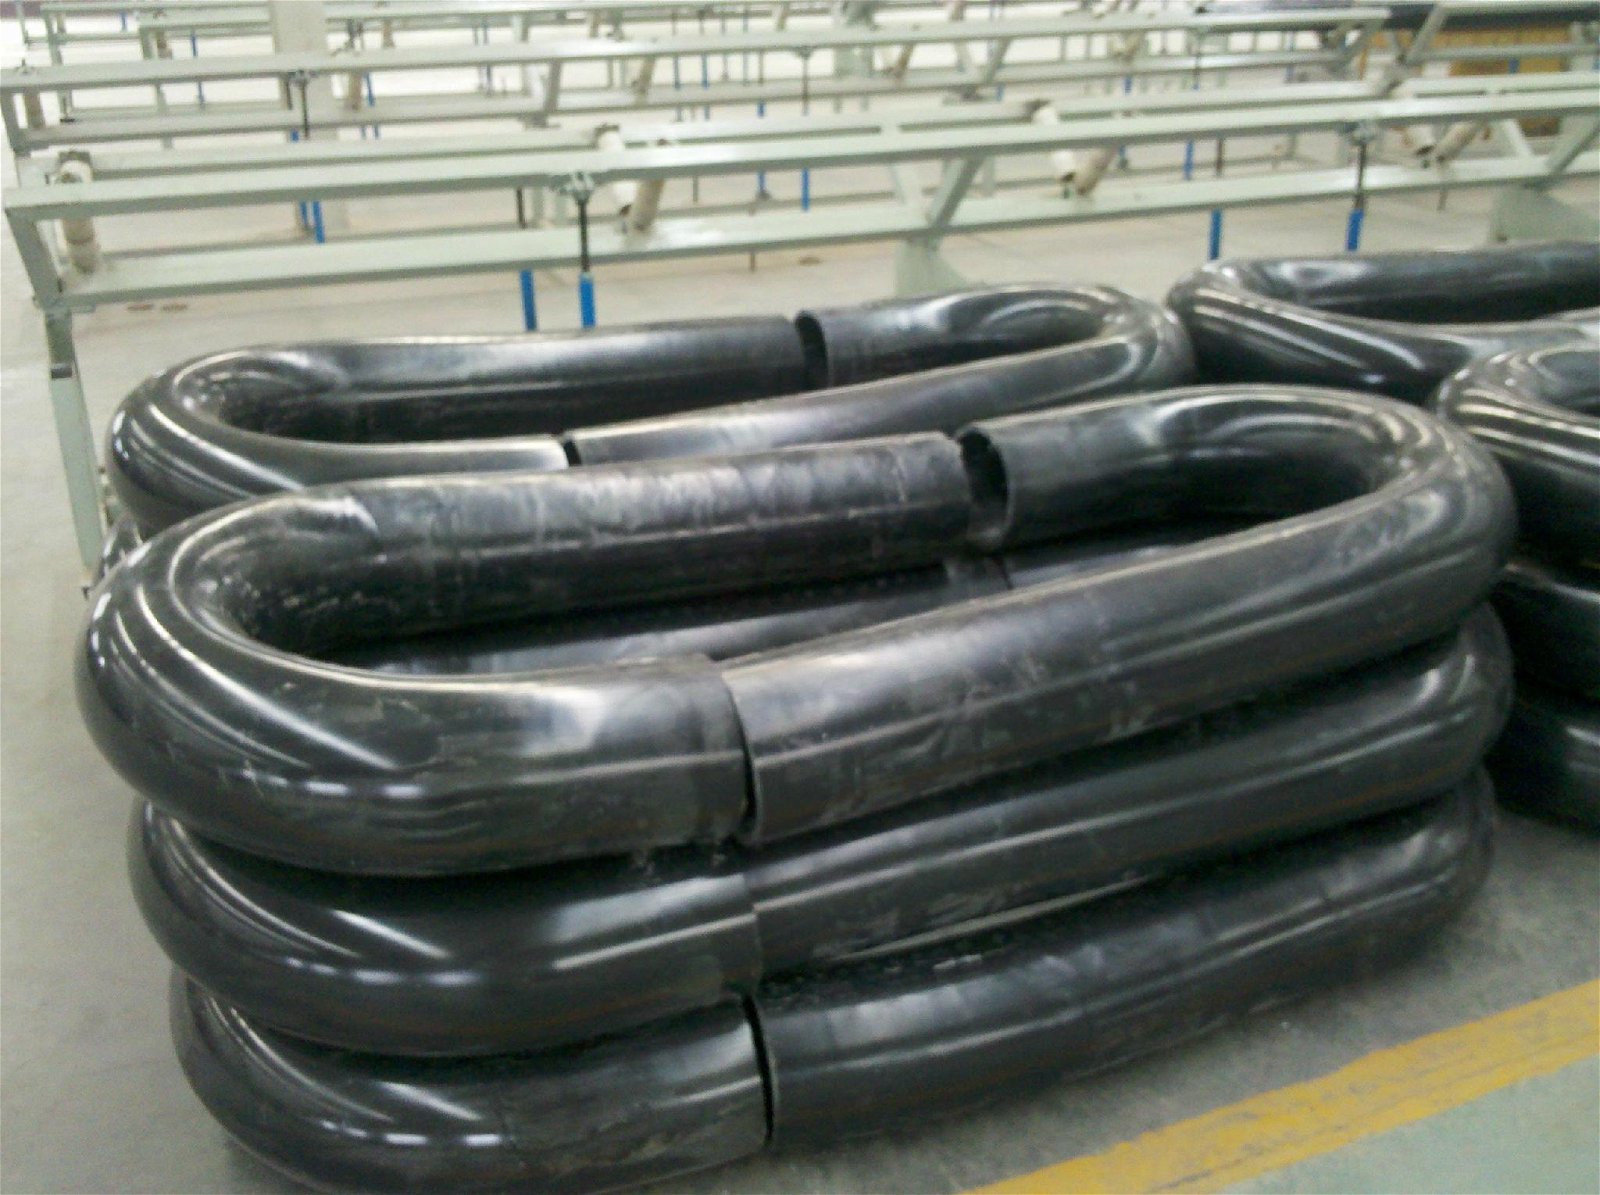 uhmwpe pipes instead of steel pipe to transport mining tails in dredging project 5